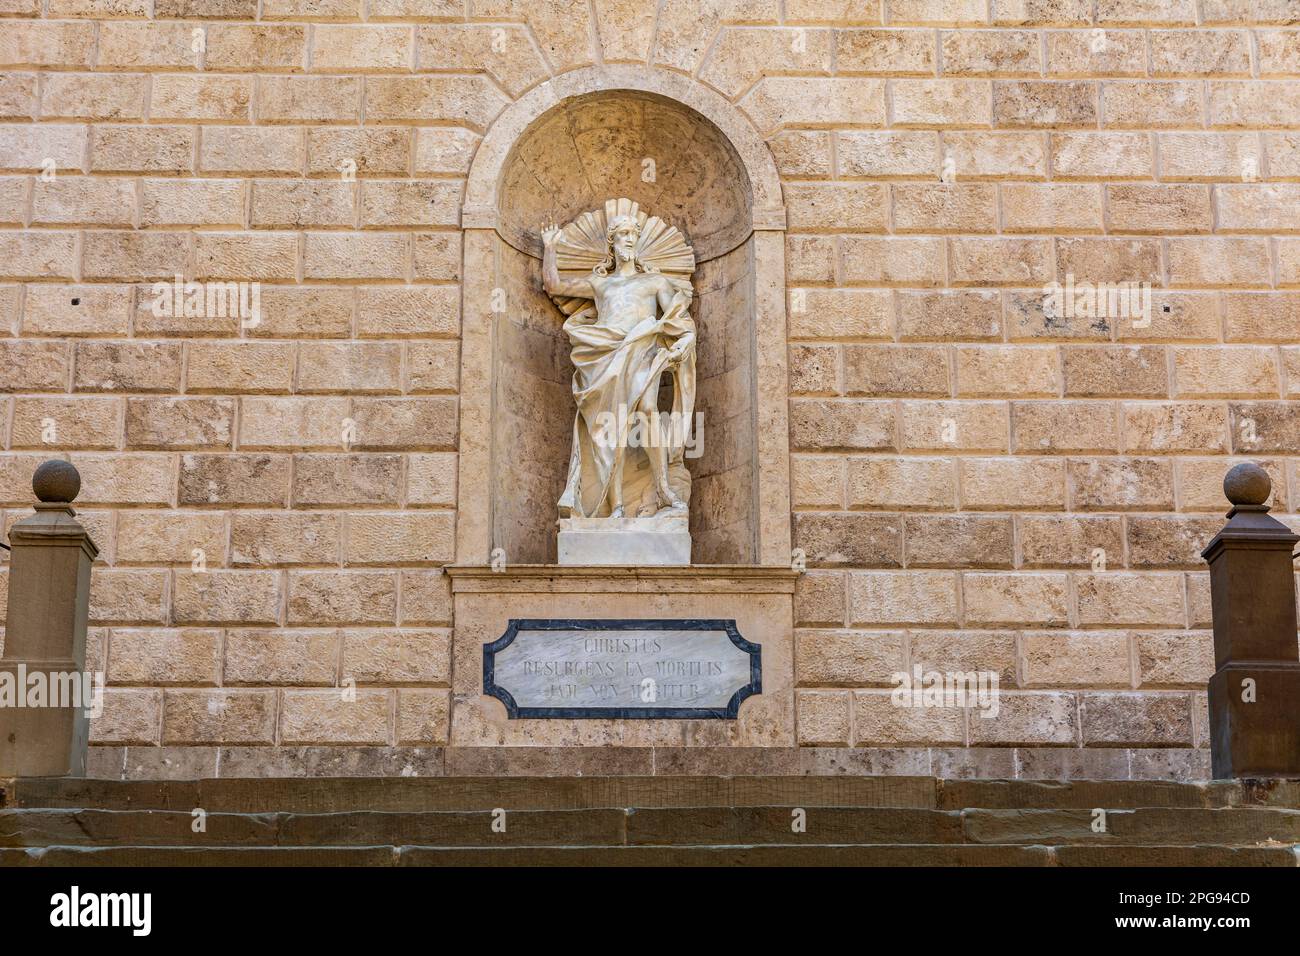 Statue of the risen Jesus Christ outside the church of the most holy crucifix (Francesco Baratta - 1636) - San Miniato, Tuscany, Italy Stock Photo